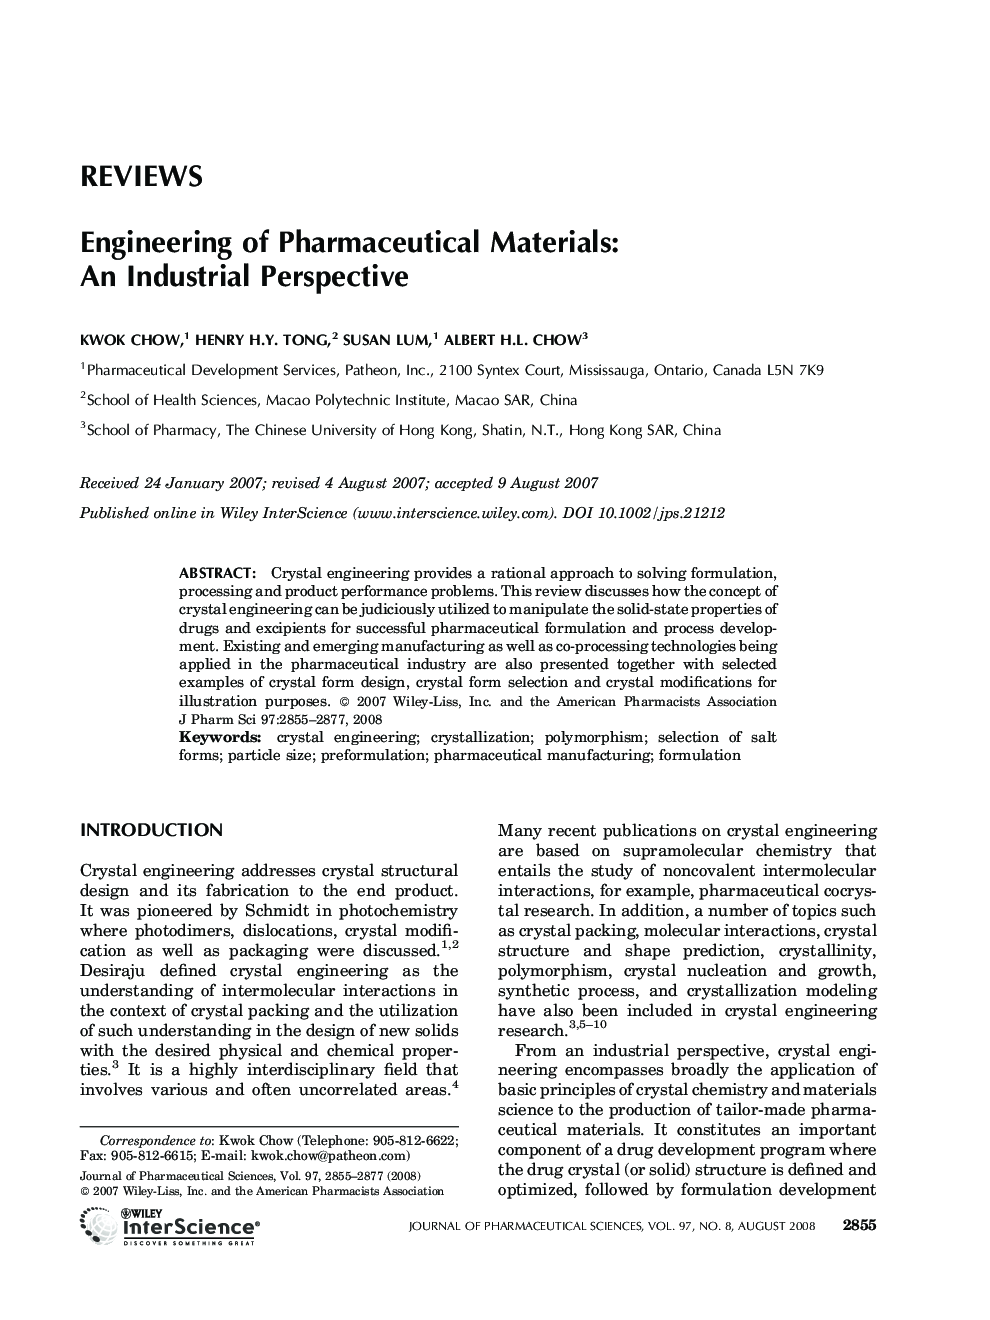 Engineering of Pharmaceutical Materials: An Industrial Perspective